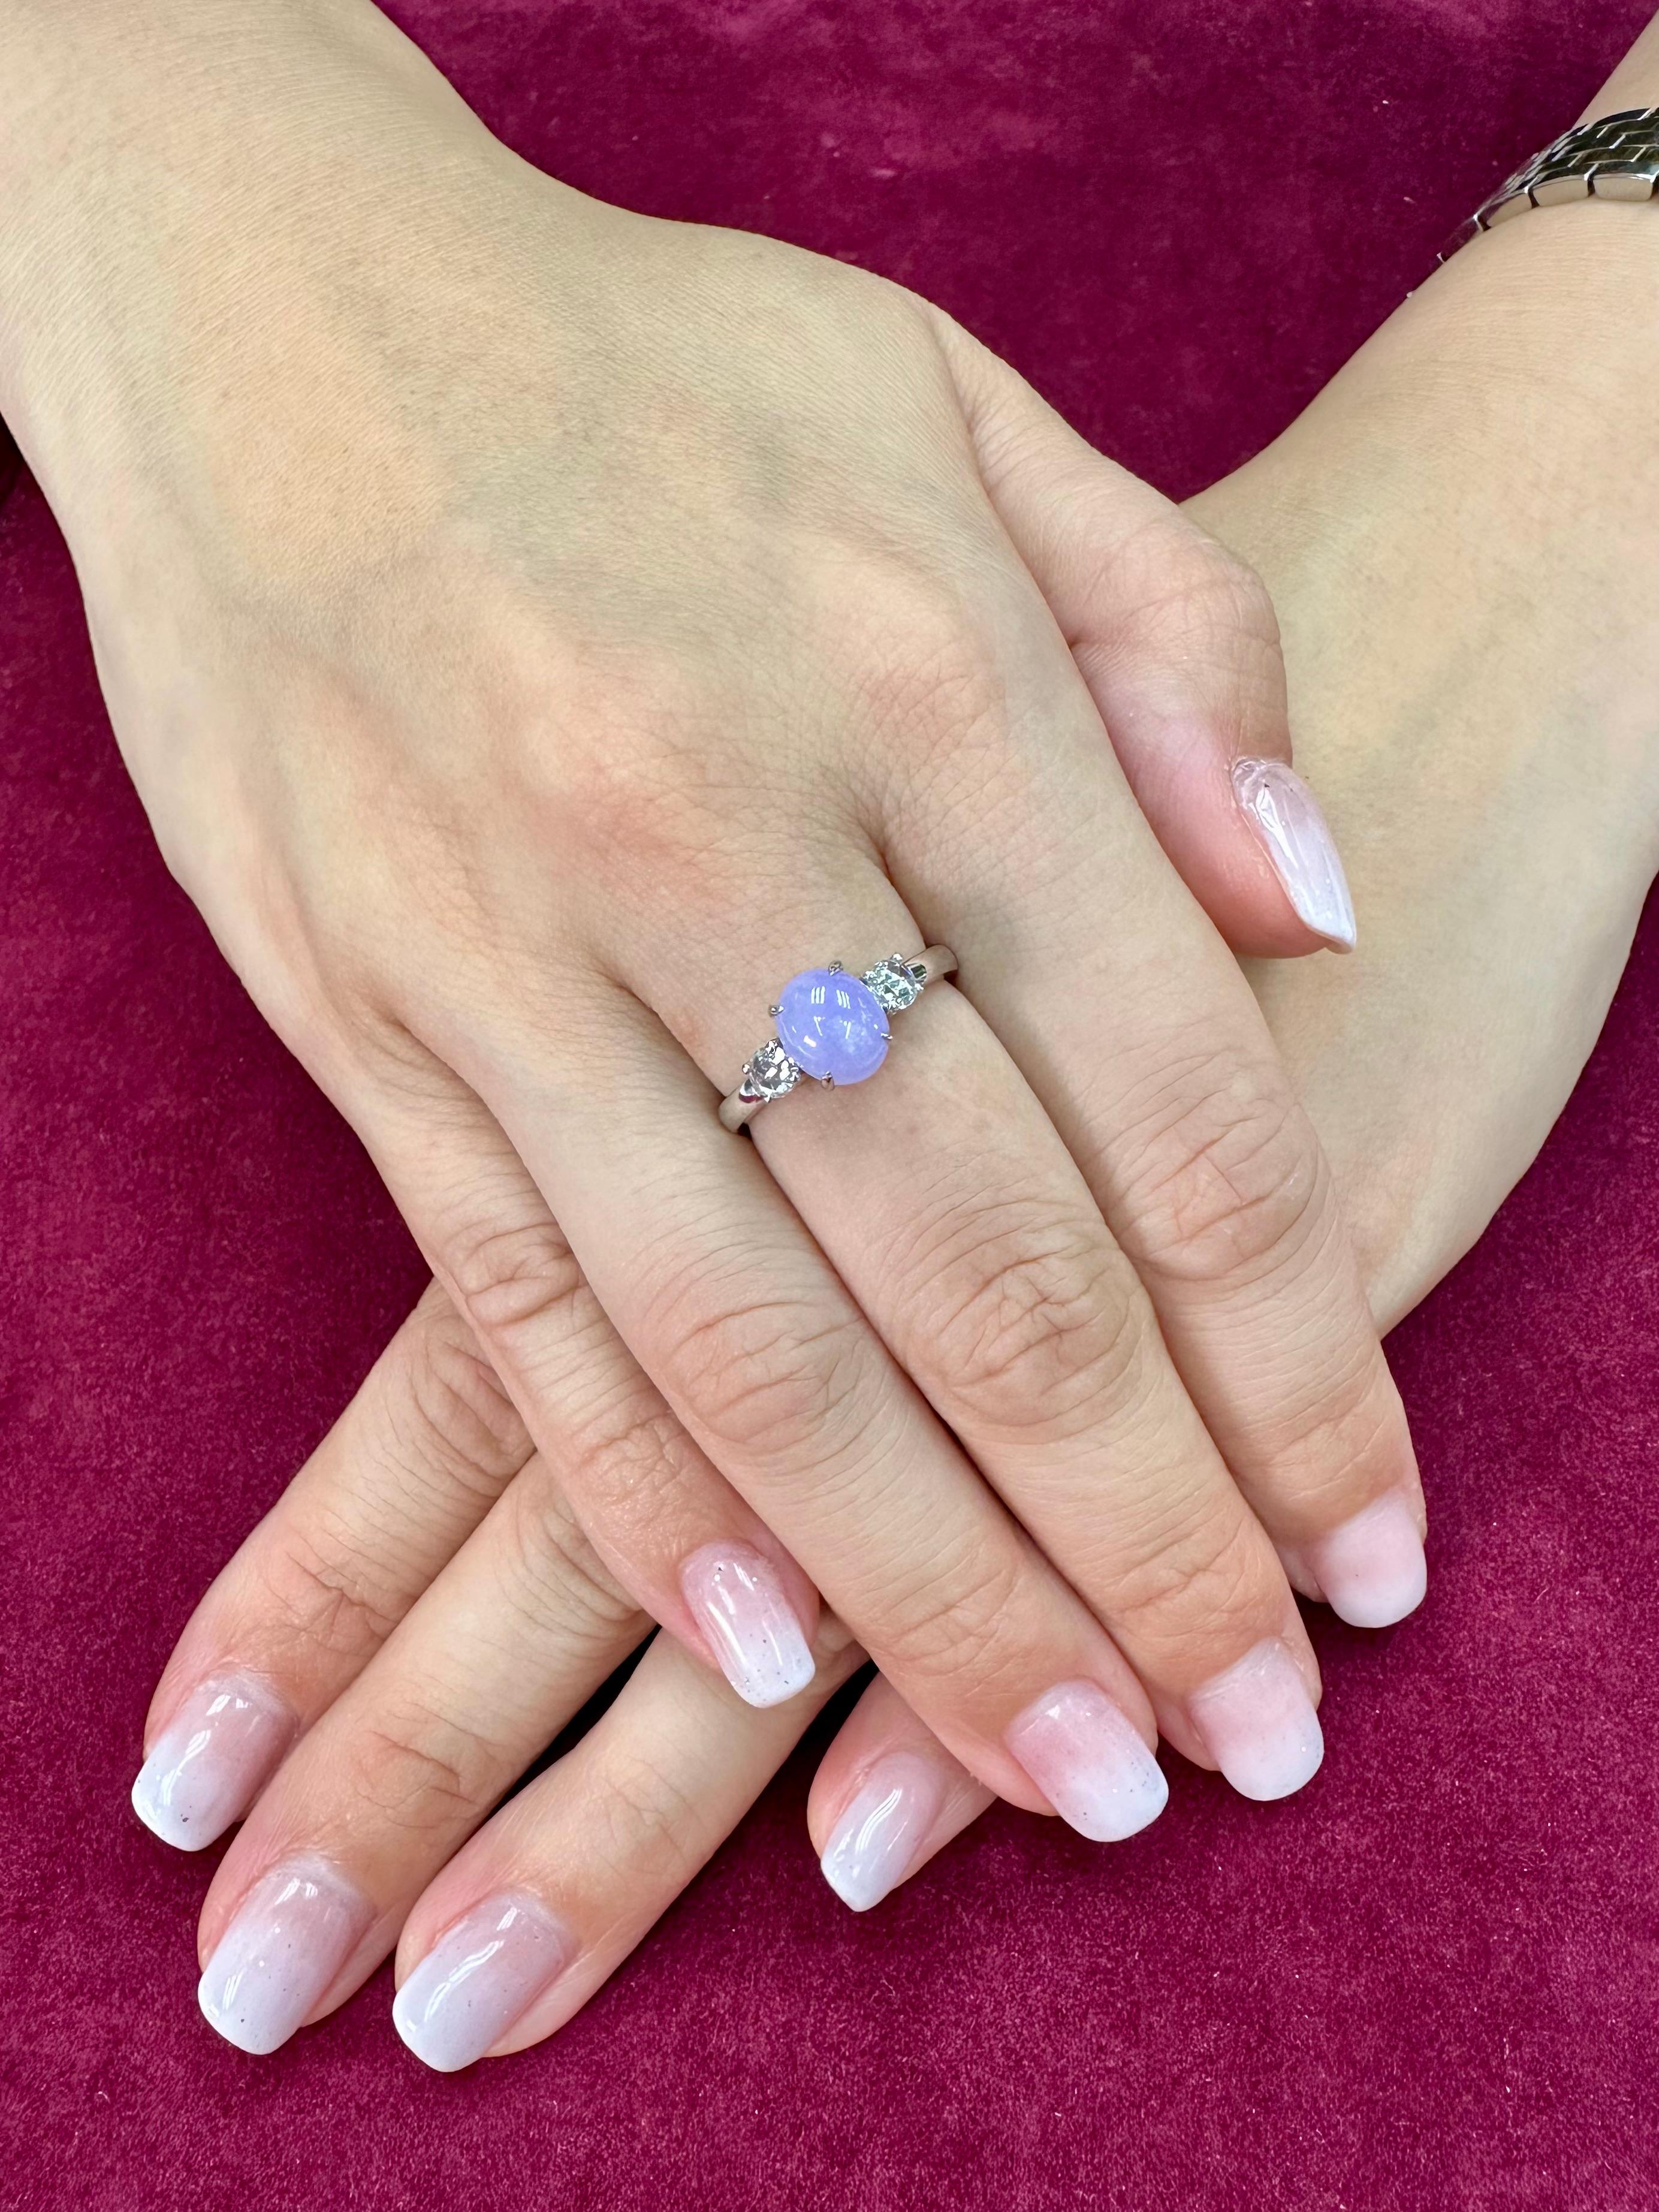 Please check out the HD Video! Here is a very eye pleasing lavender jade and diamond 3 stone ring! It is certified natural jadeite jade. The ring is set in 18k white gold and diamonds. There are 2 new rose cut diamonds that are on each side of the